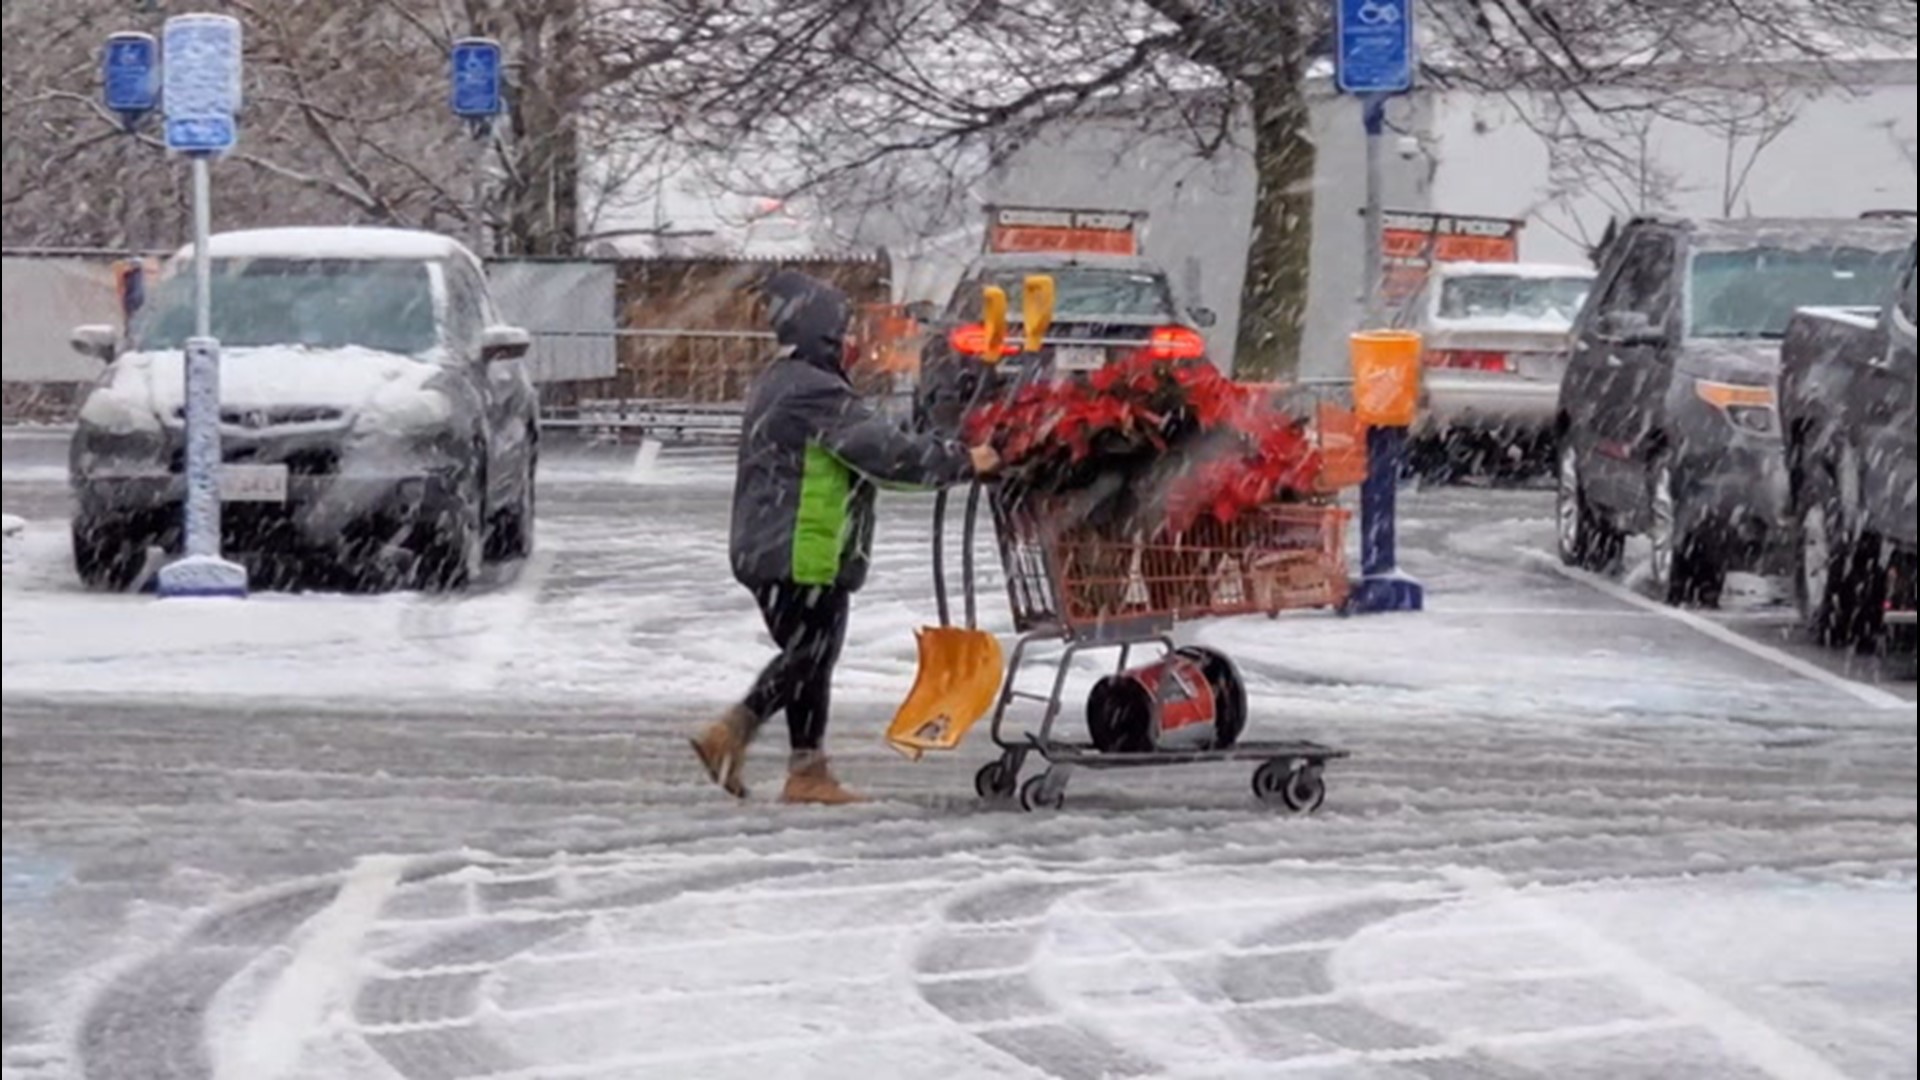 As snow fell on Boston, Massachusetts, people stopped by their local hardware stores on Dec. 5, to grab shovels, salt and other supplies that would help clear the snow.